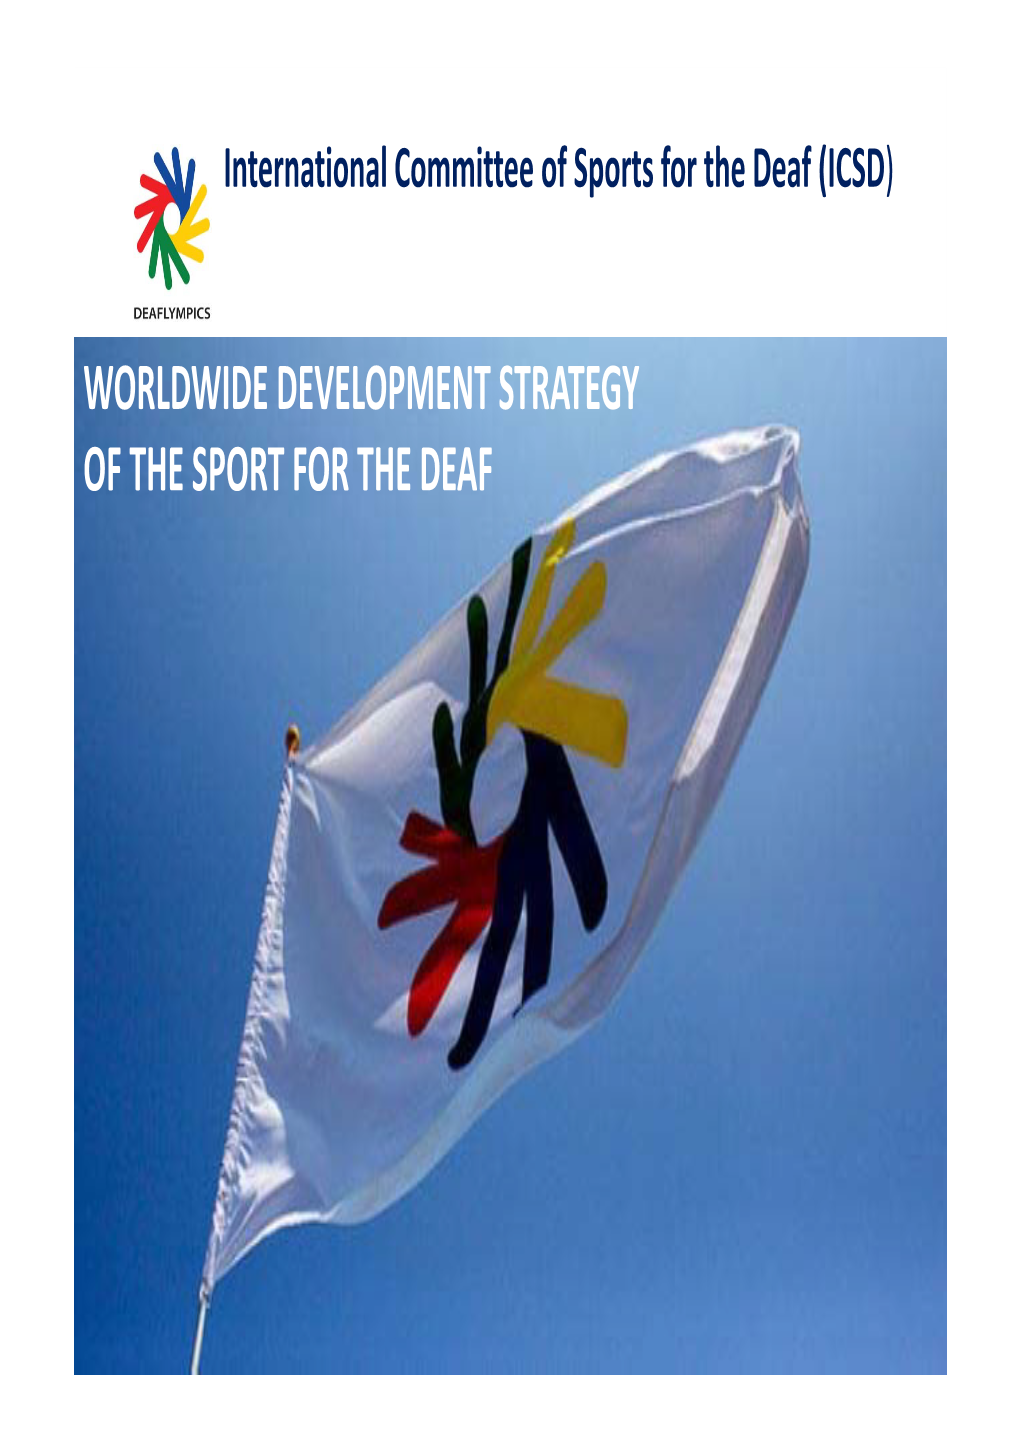 The Worldwide Development Strategy of the Sport for The